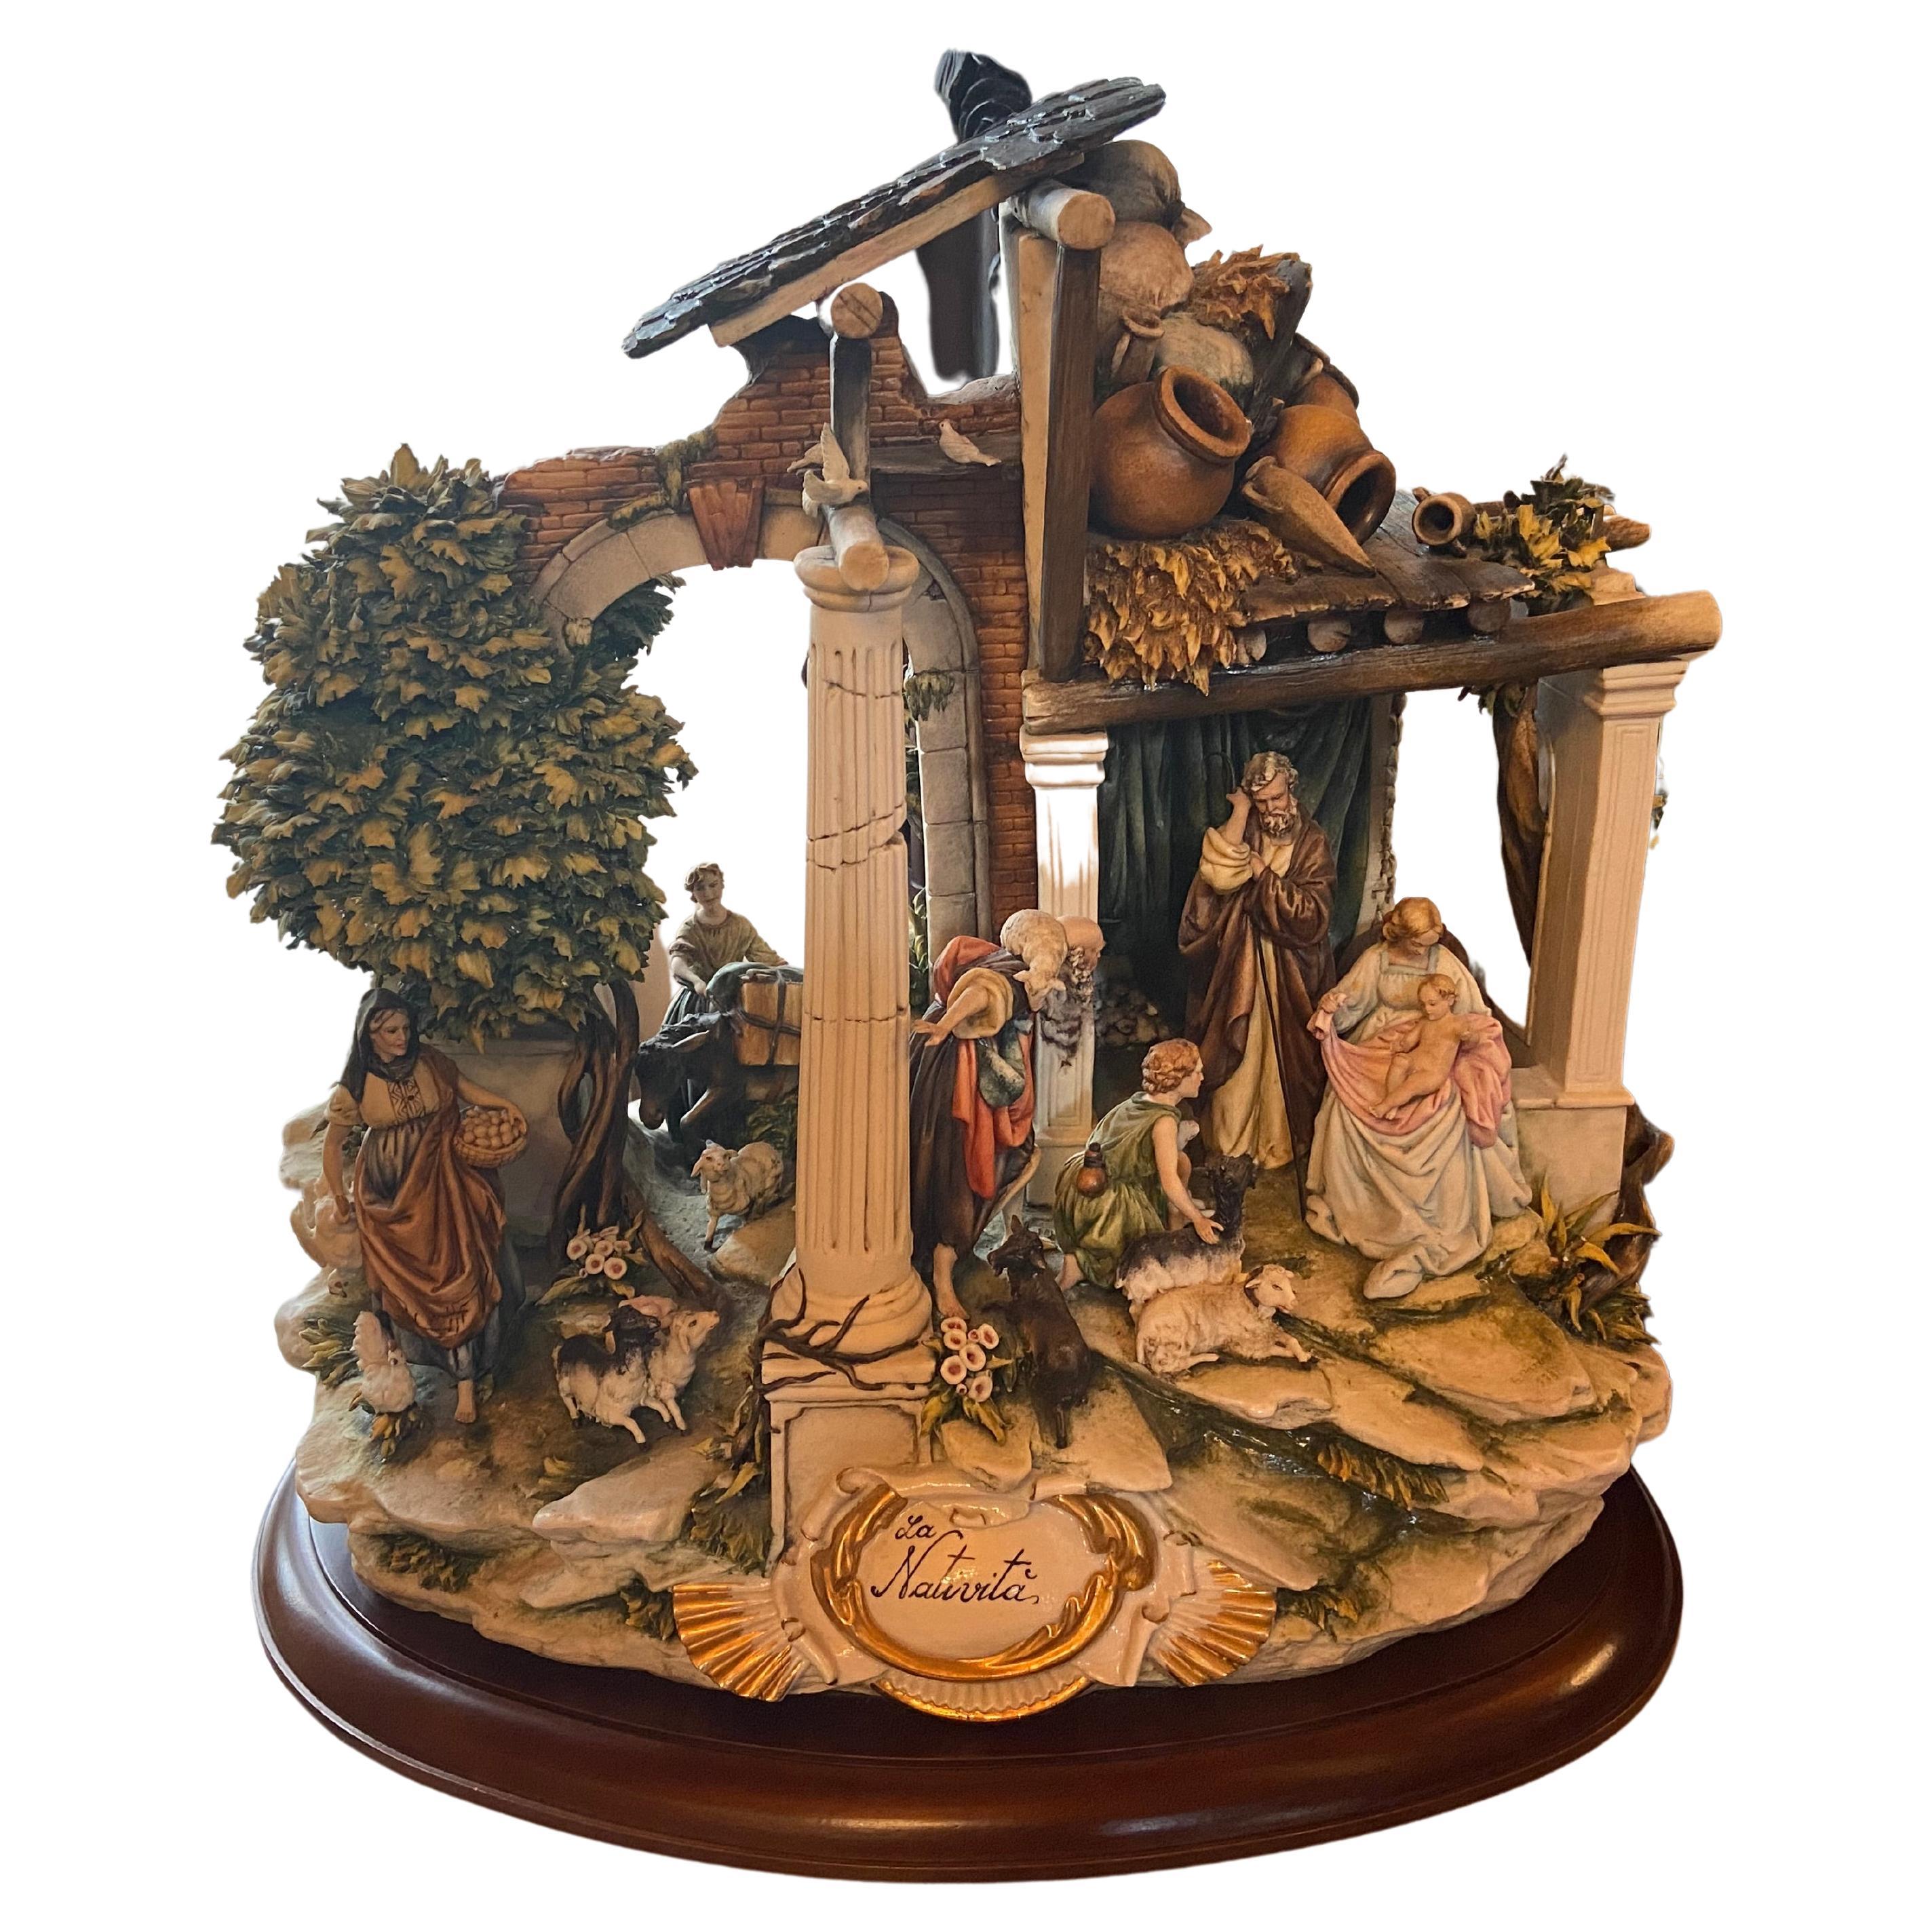 "The Nativity Scene" Made from Bisquit Porcelain, Limited Number of the Edition For Sale